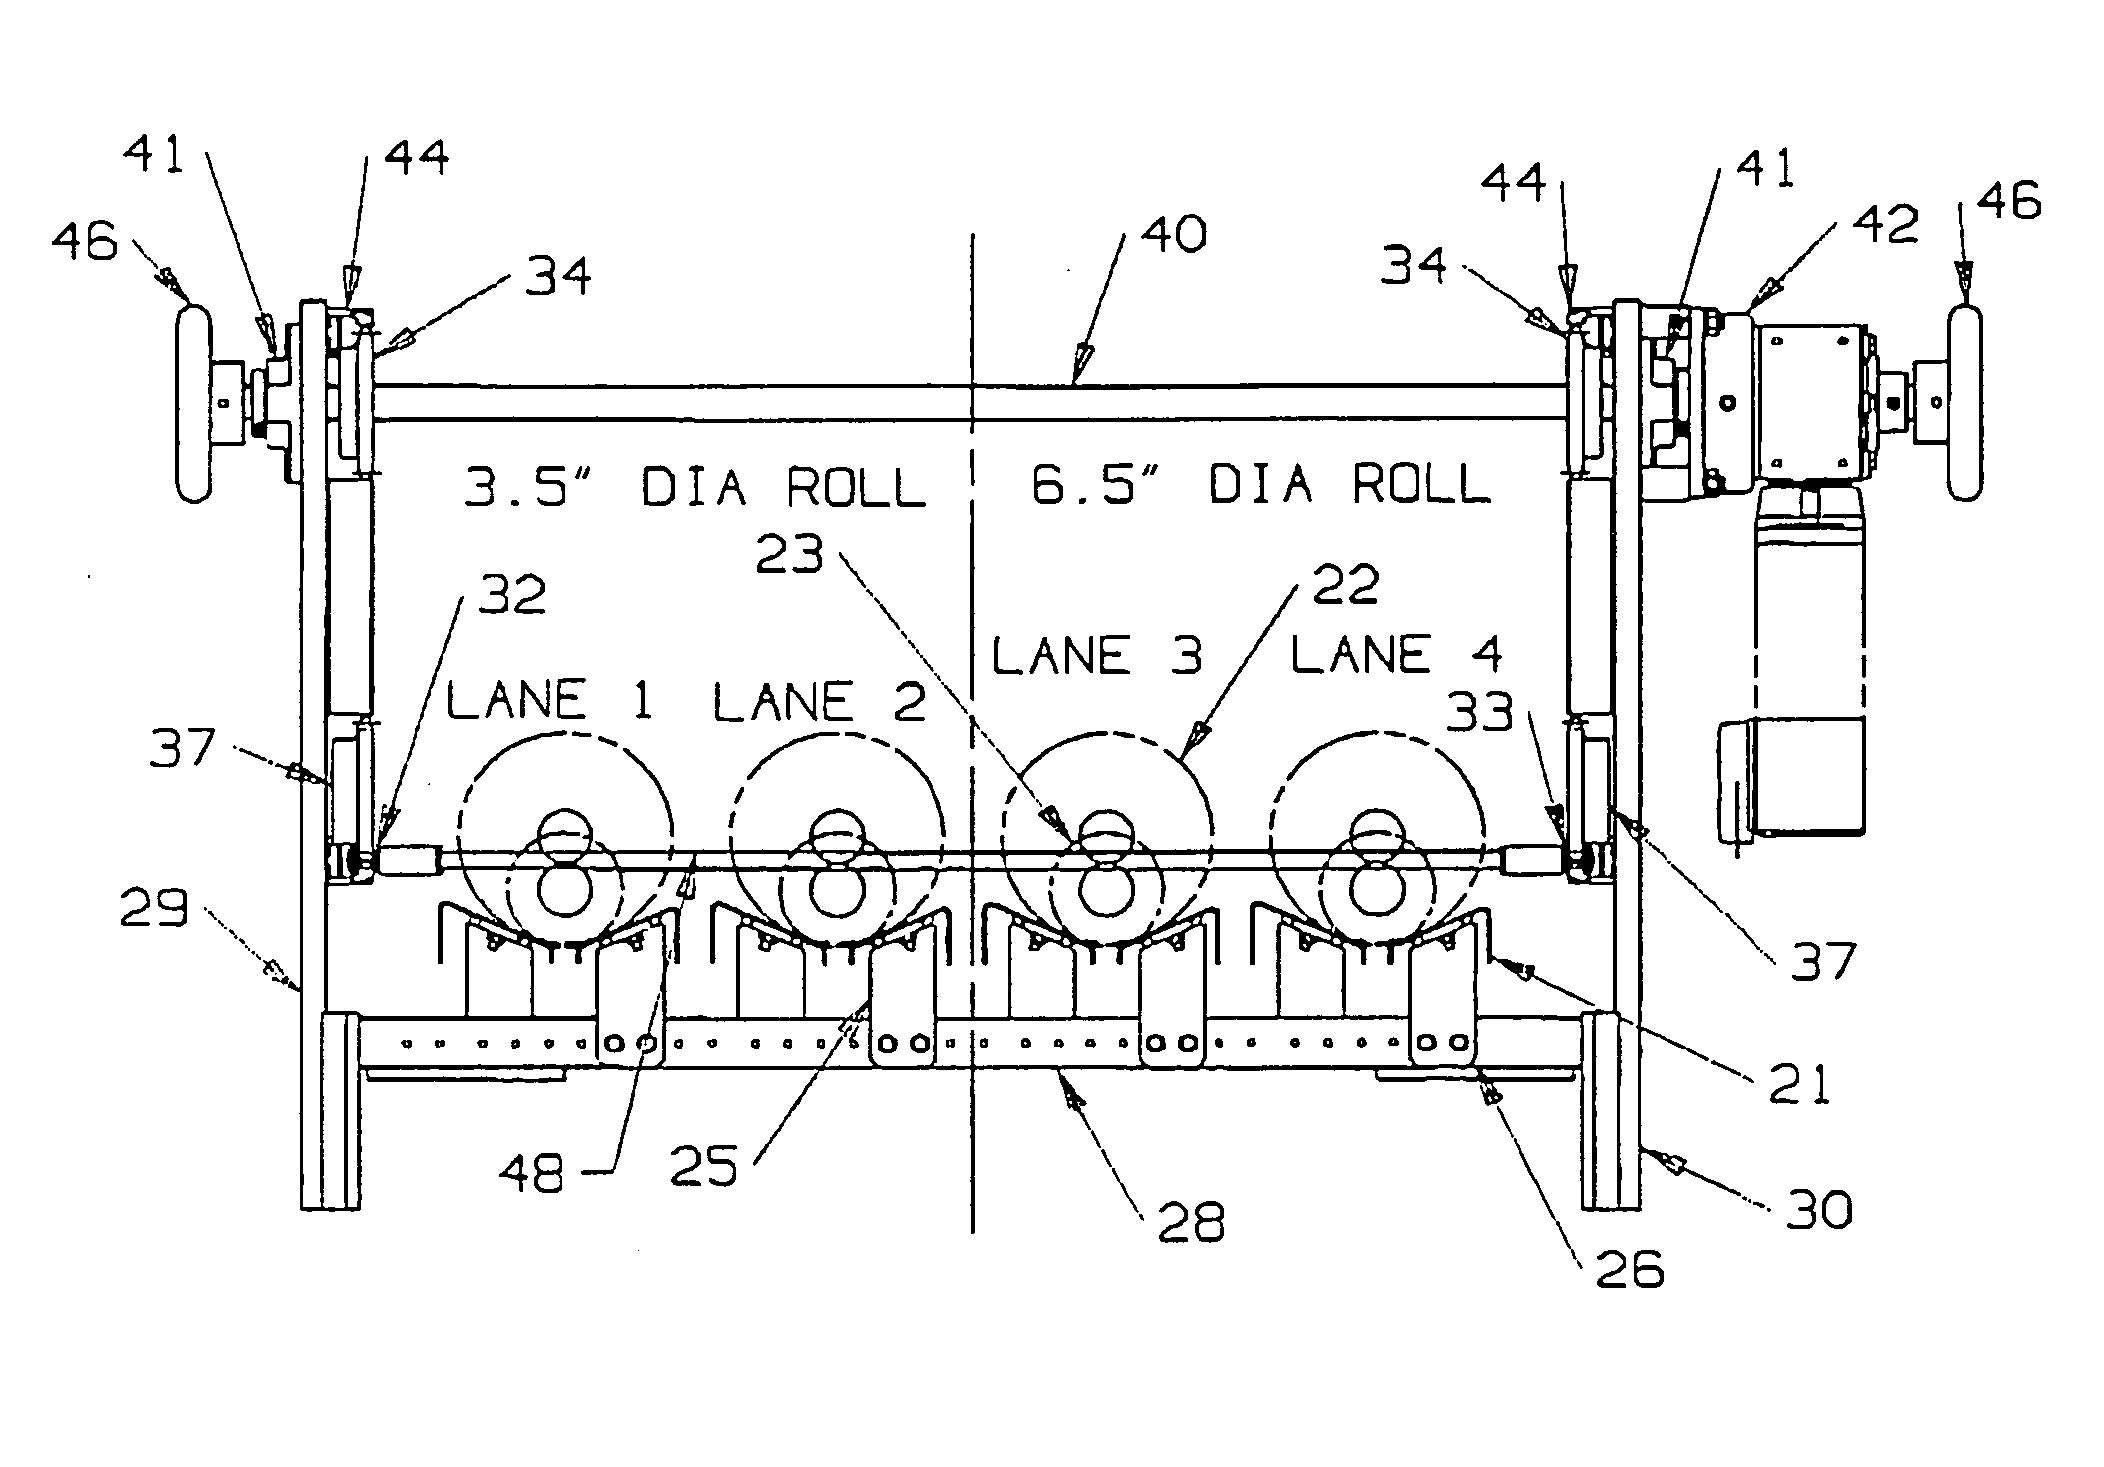 Apparatus for feeding rolls of cut products to a wrapper